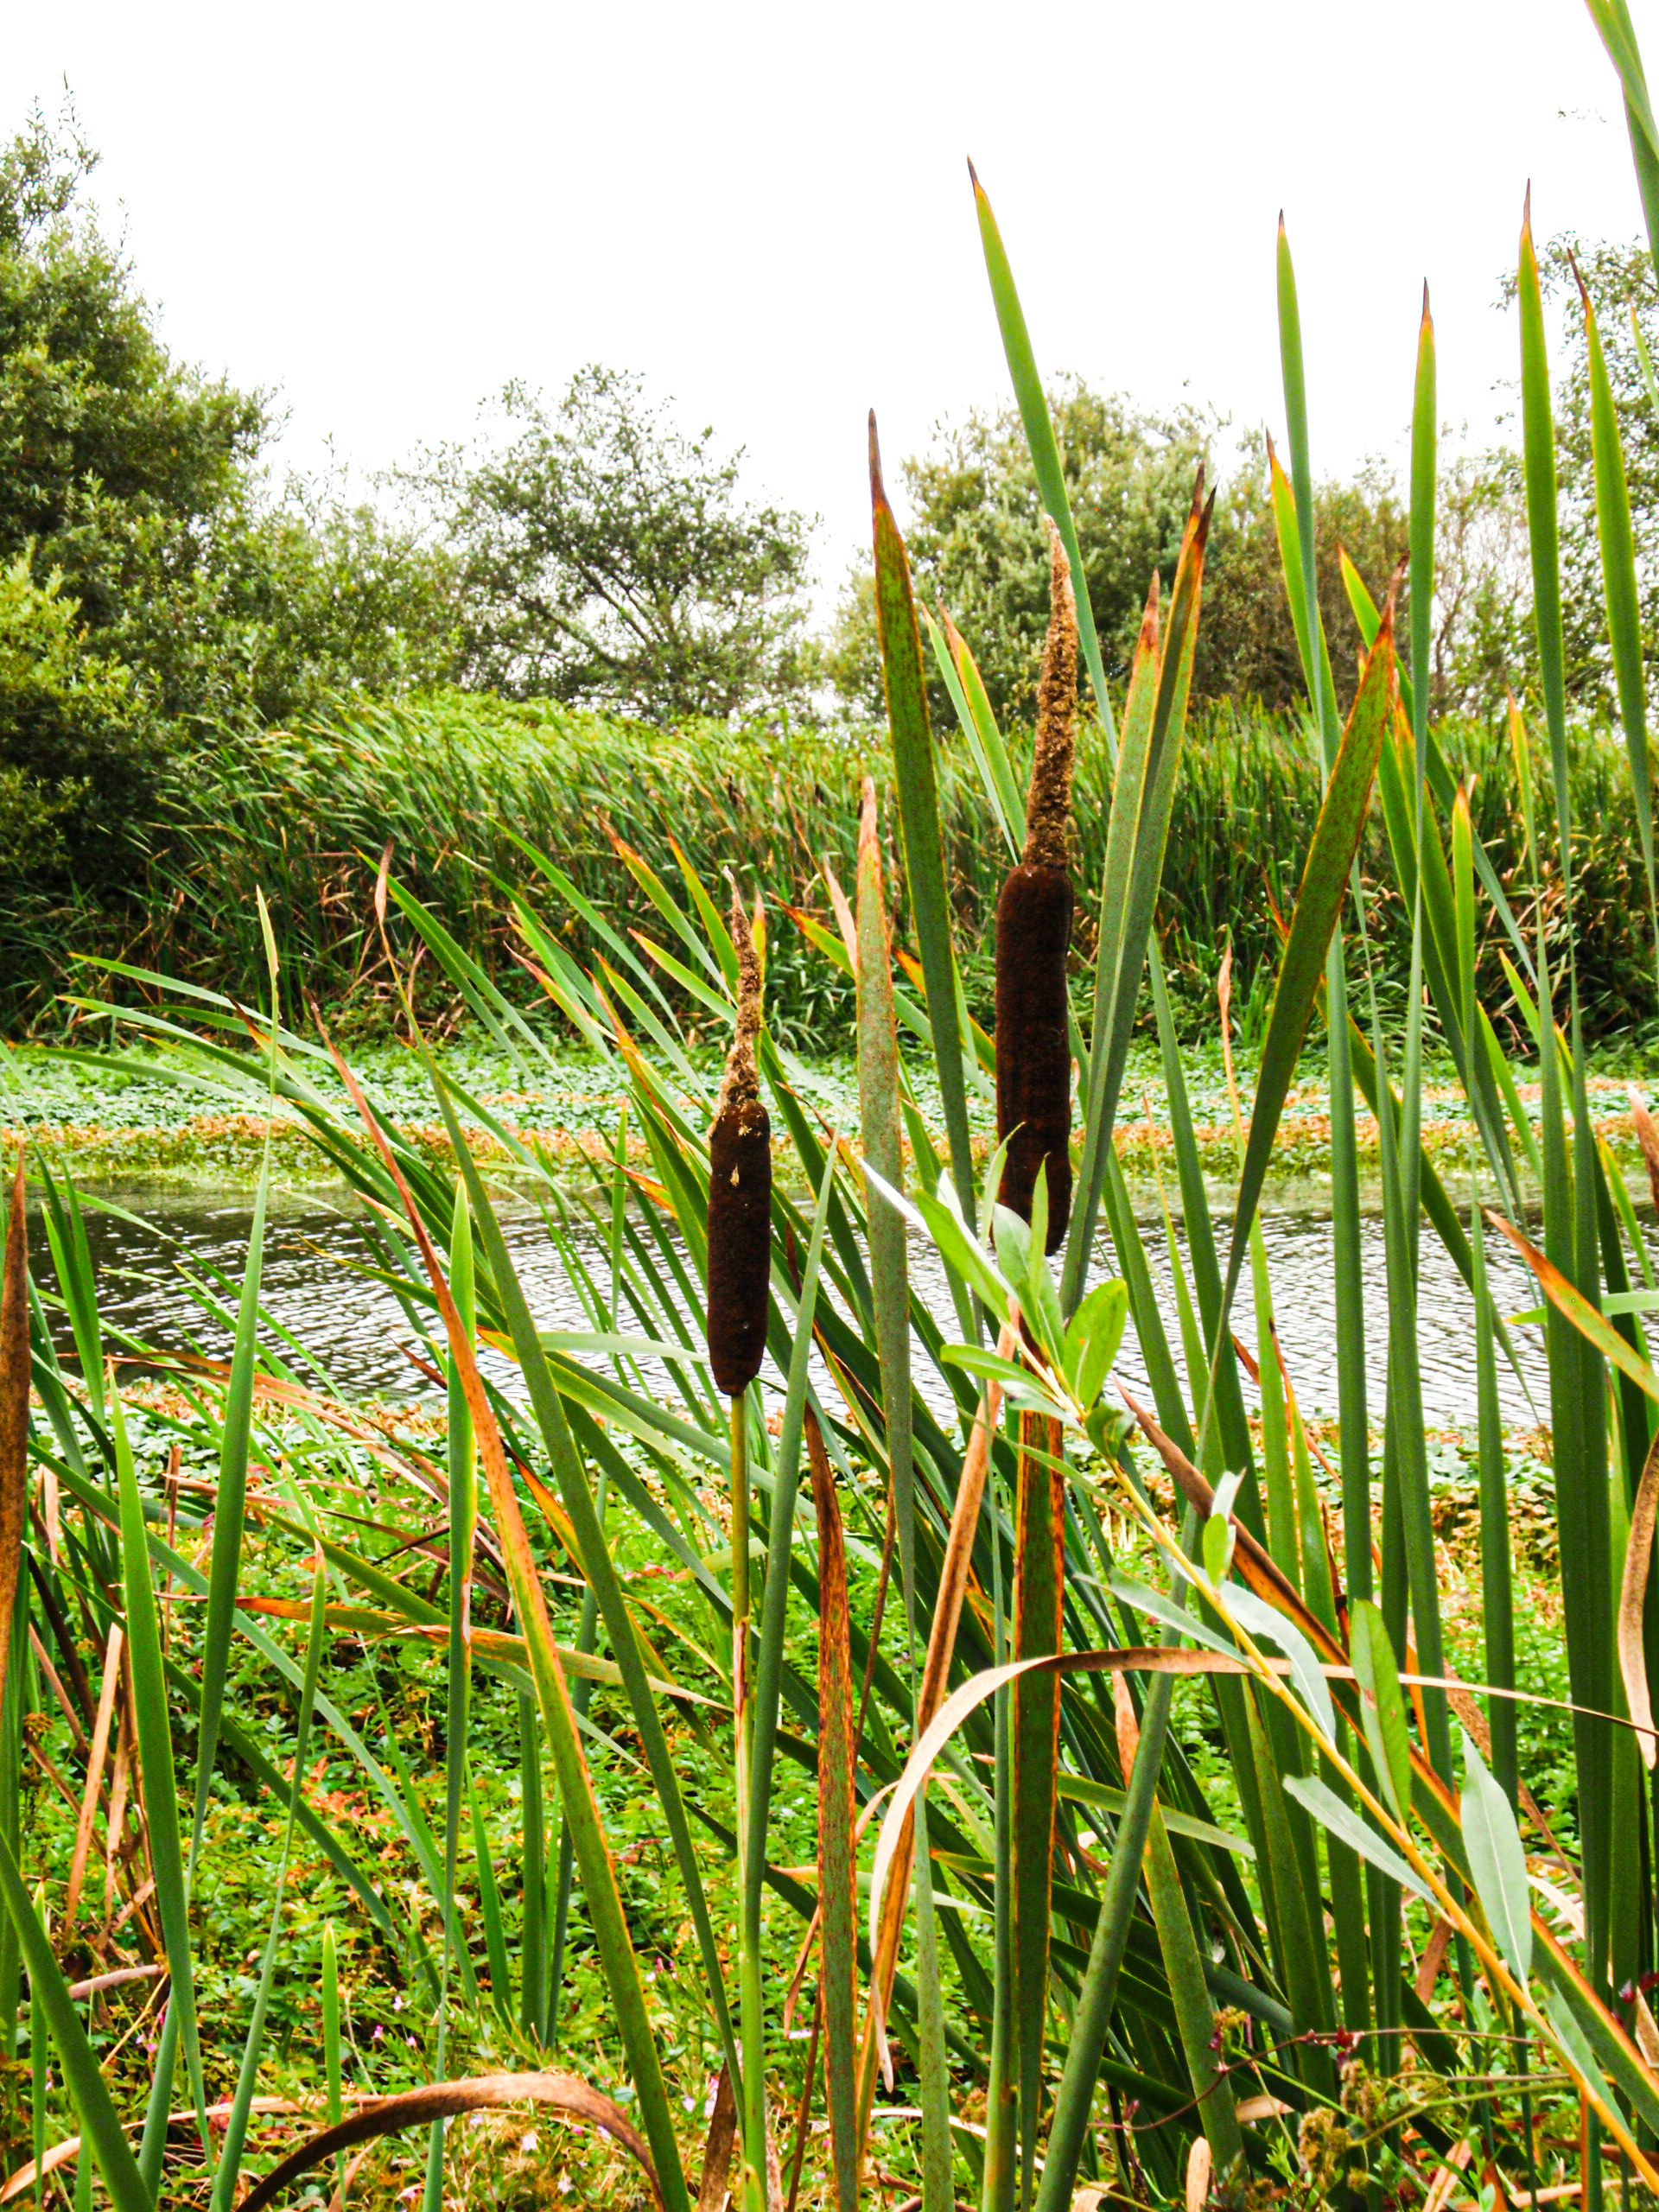 Cattail brush along the waterline with marshes and brush under an overcast sky.